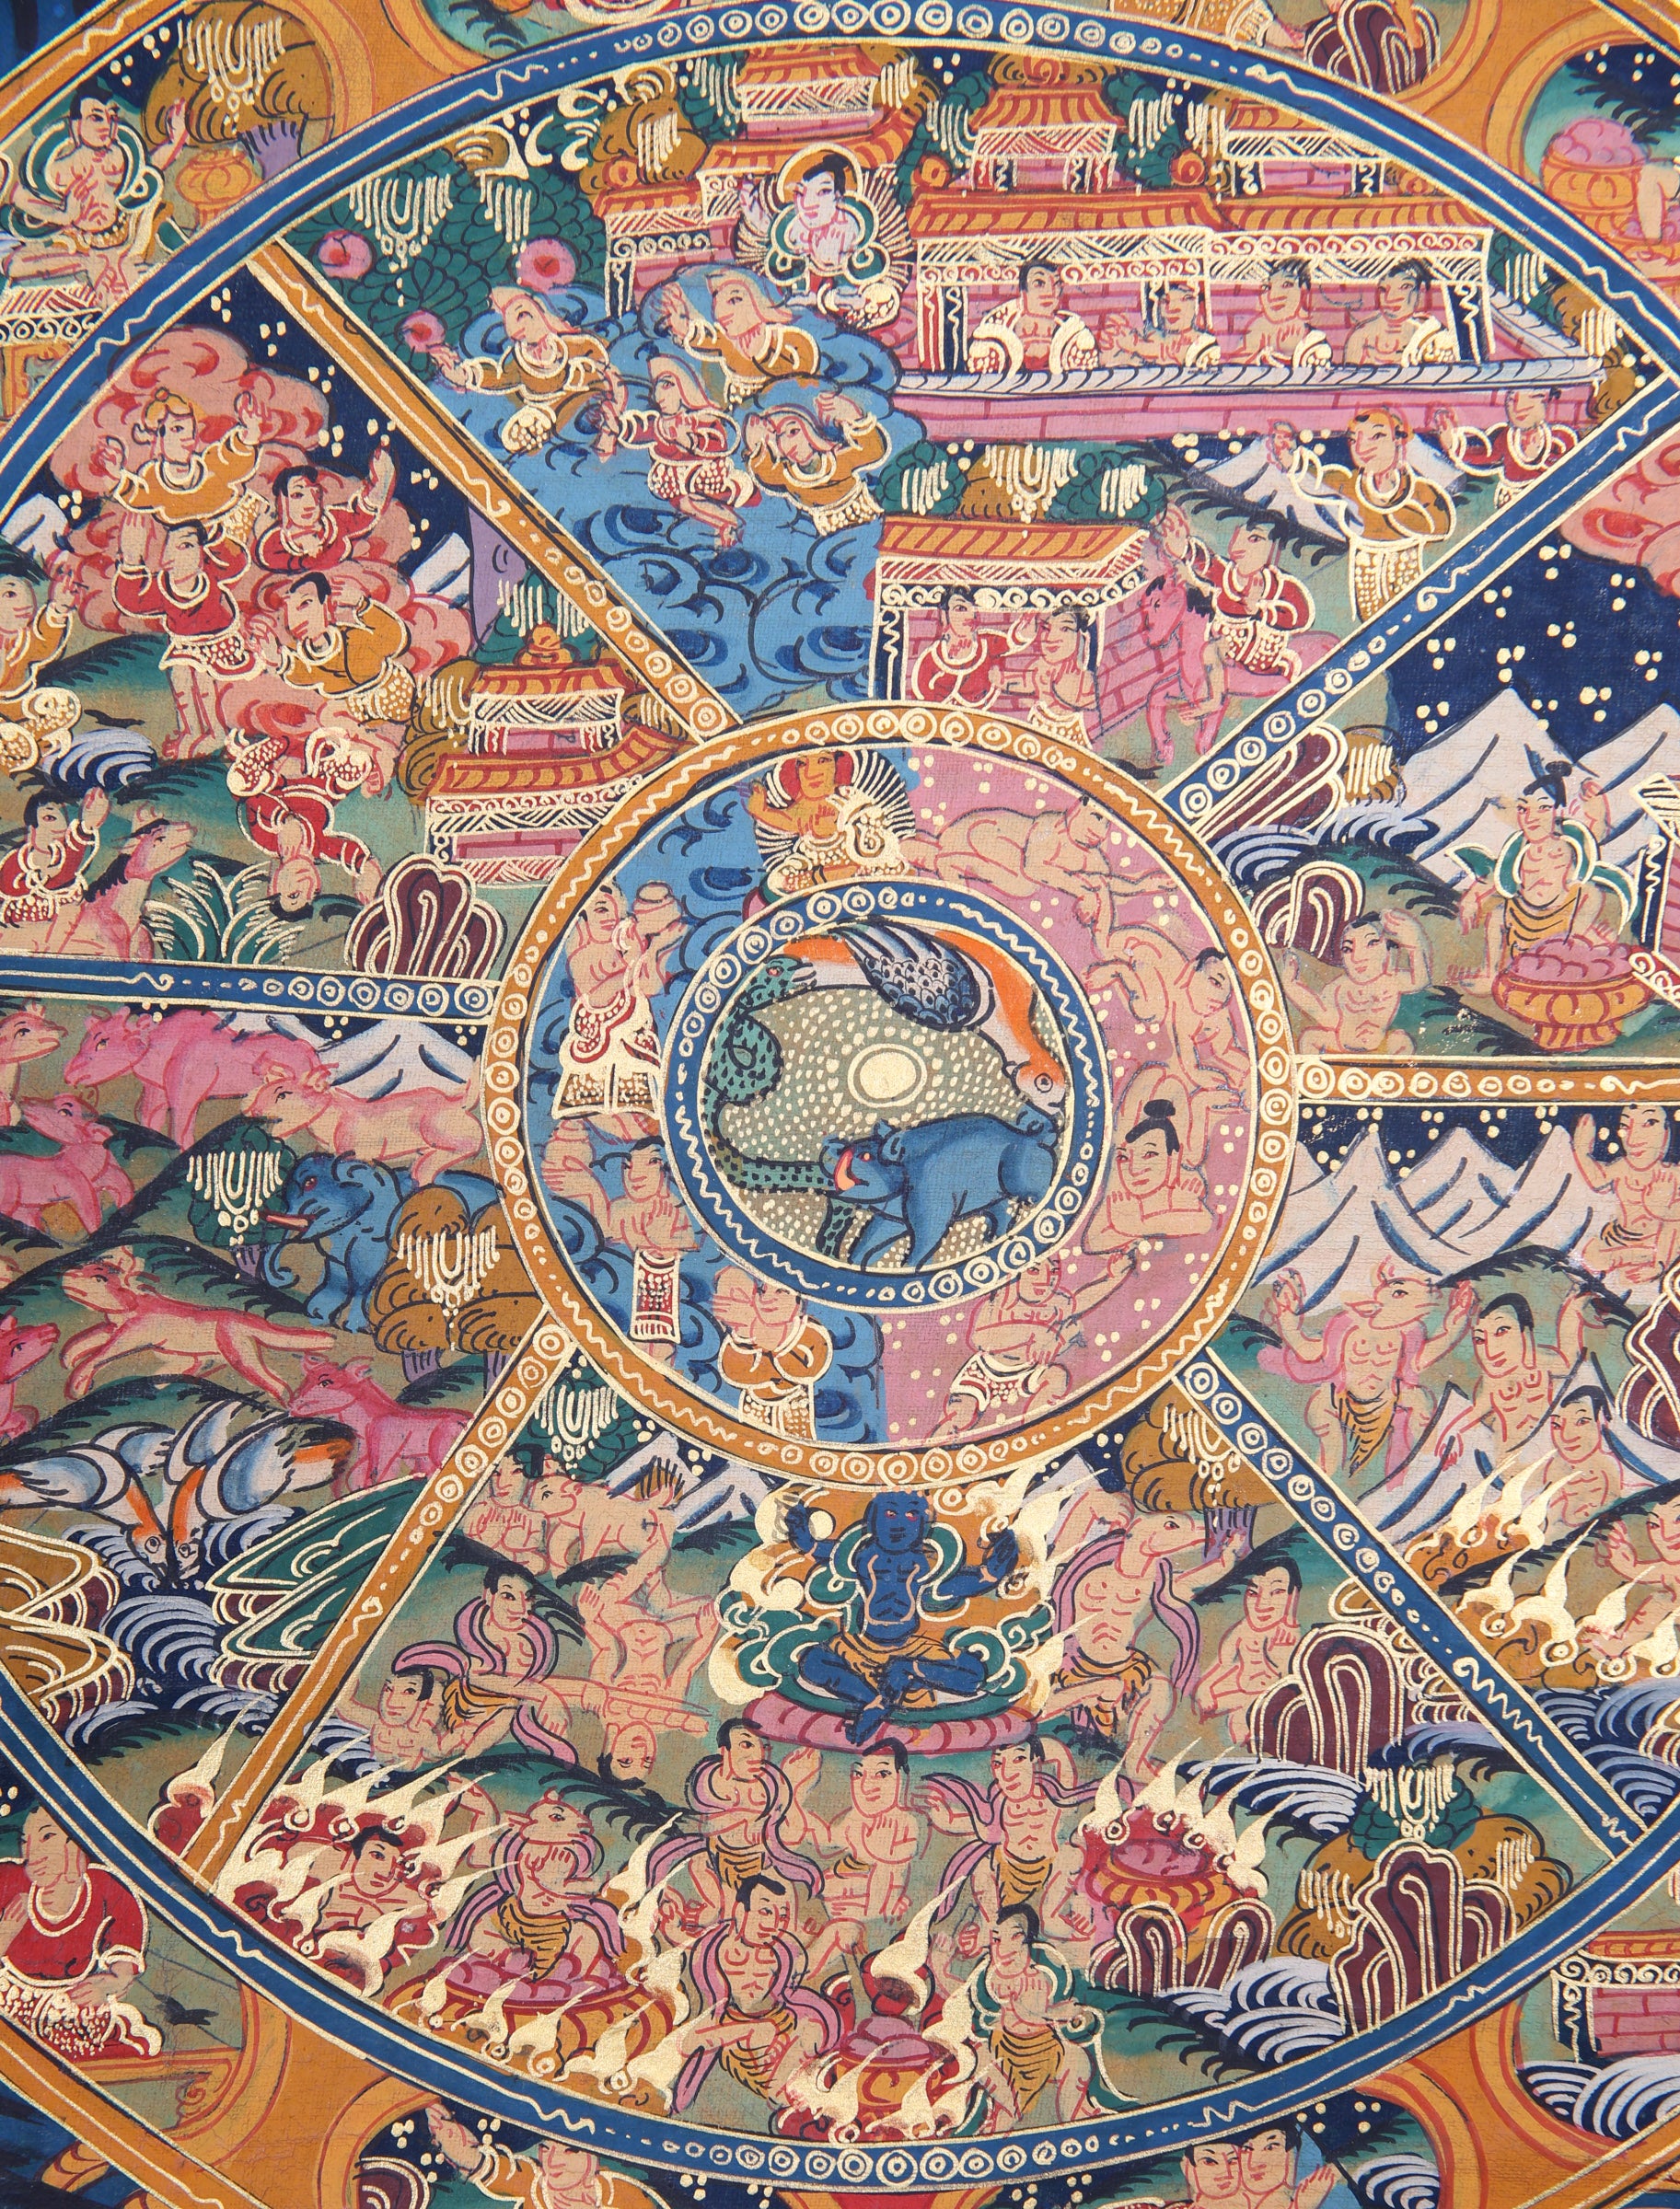 Wheel of Life Thangka Painting for spiritual freedom from suffering.